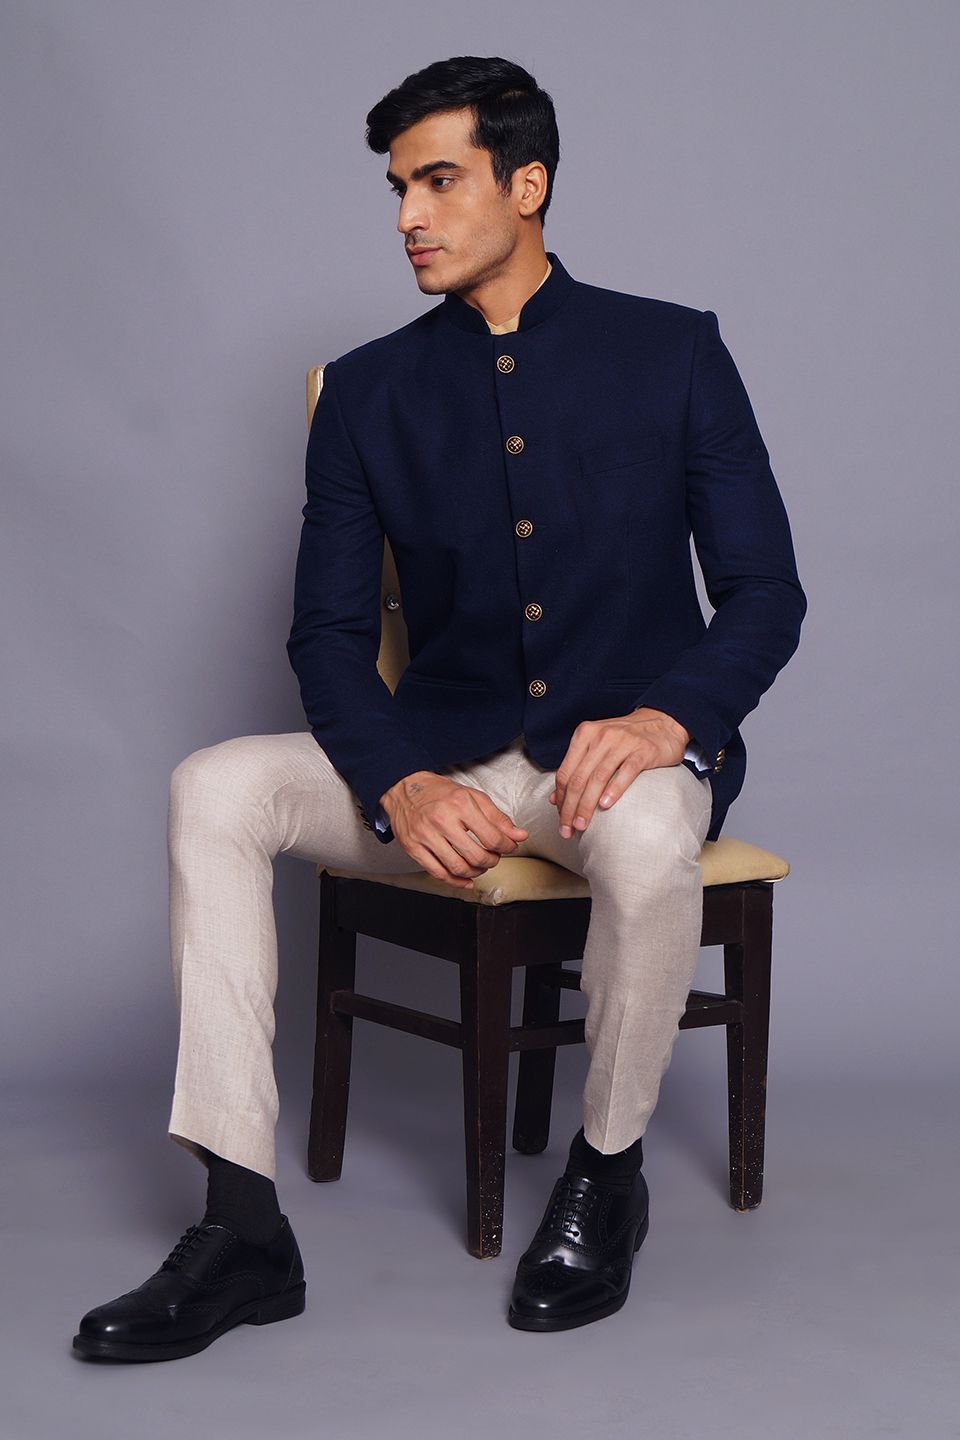 Wintage Men's Wool Casual and Festive Bandhgala Blazer : Navy Blue 